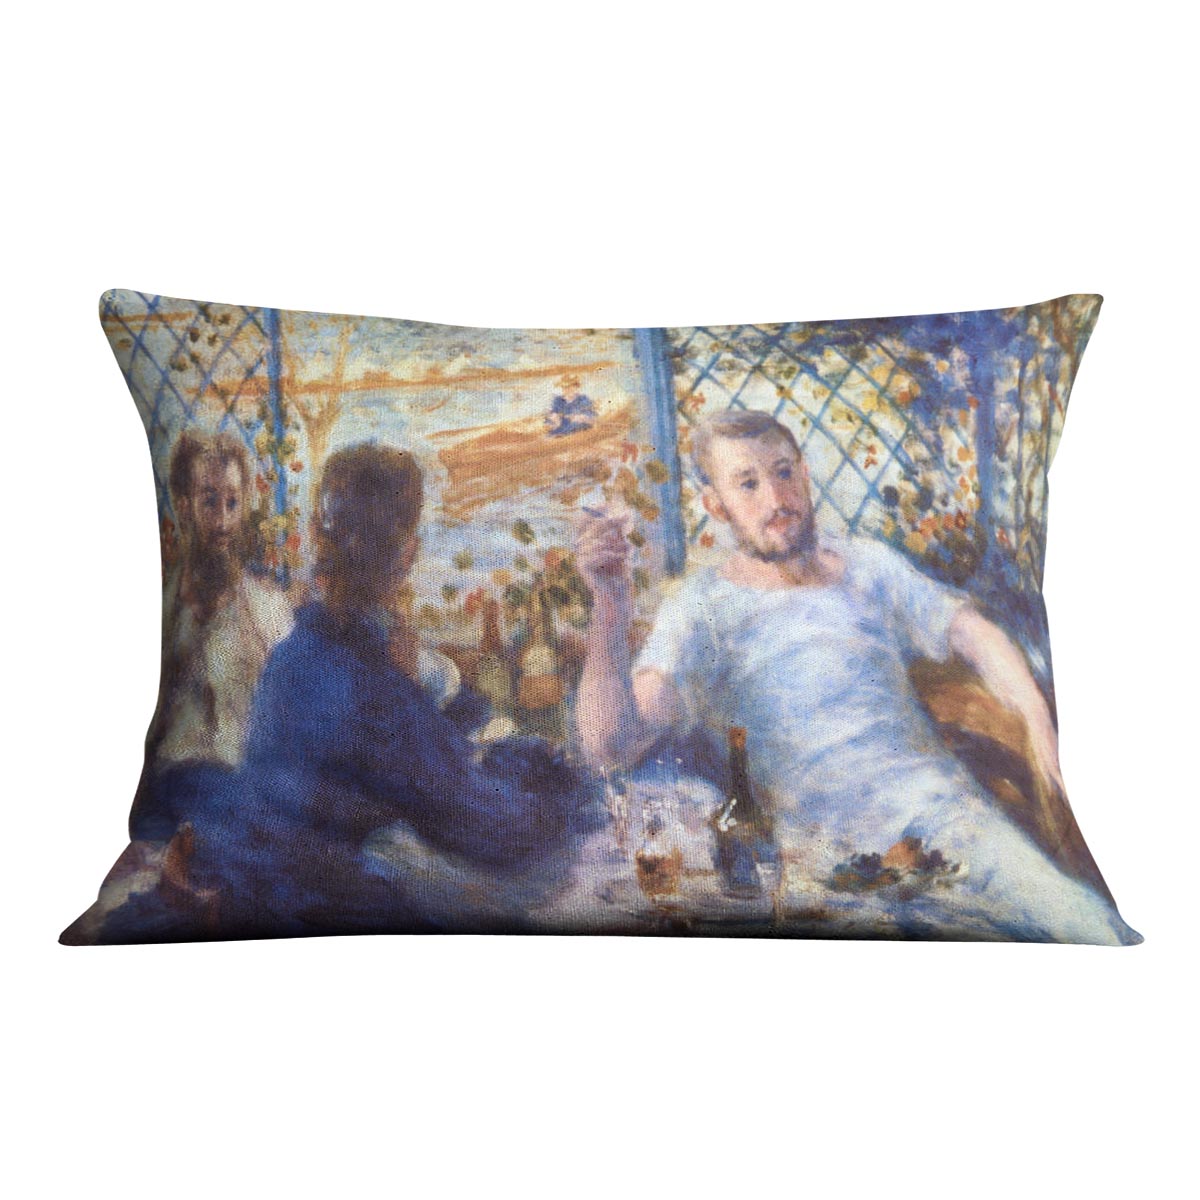 The Rowers Lunch by Renoir Cushion